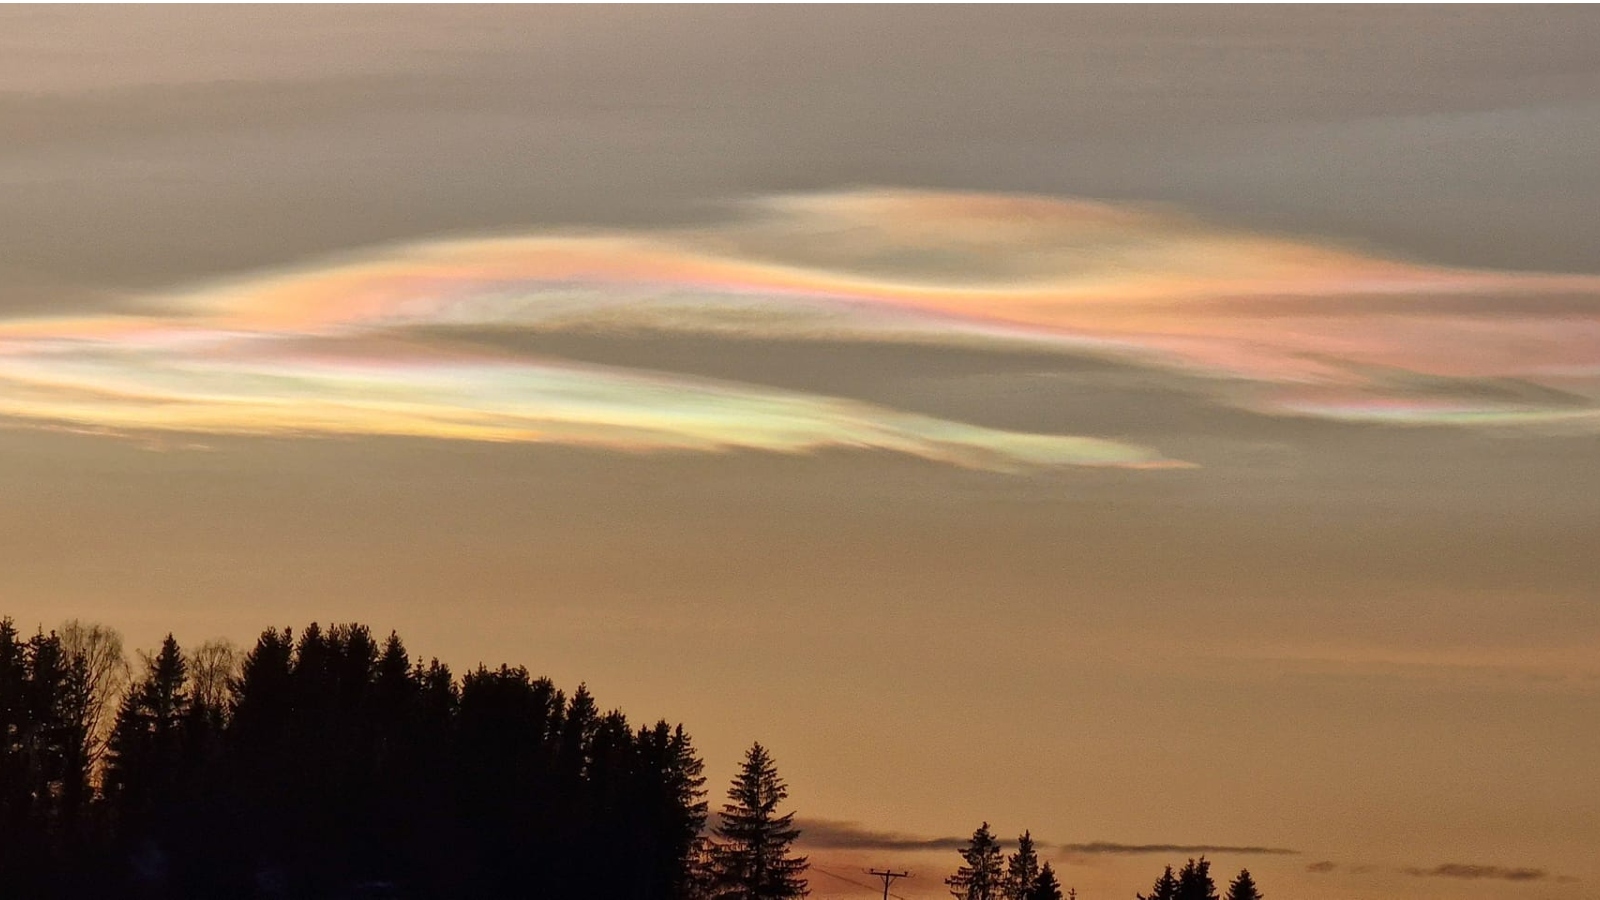 Iridescent, rainbow-colored clouds in the sky